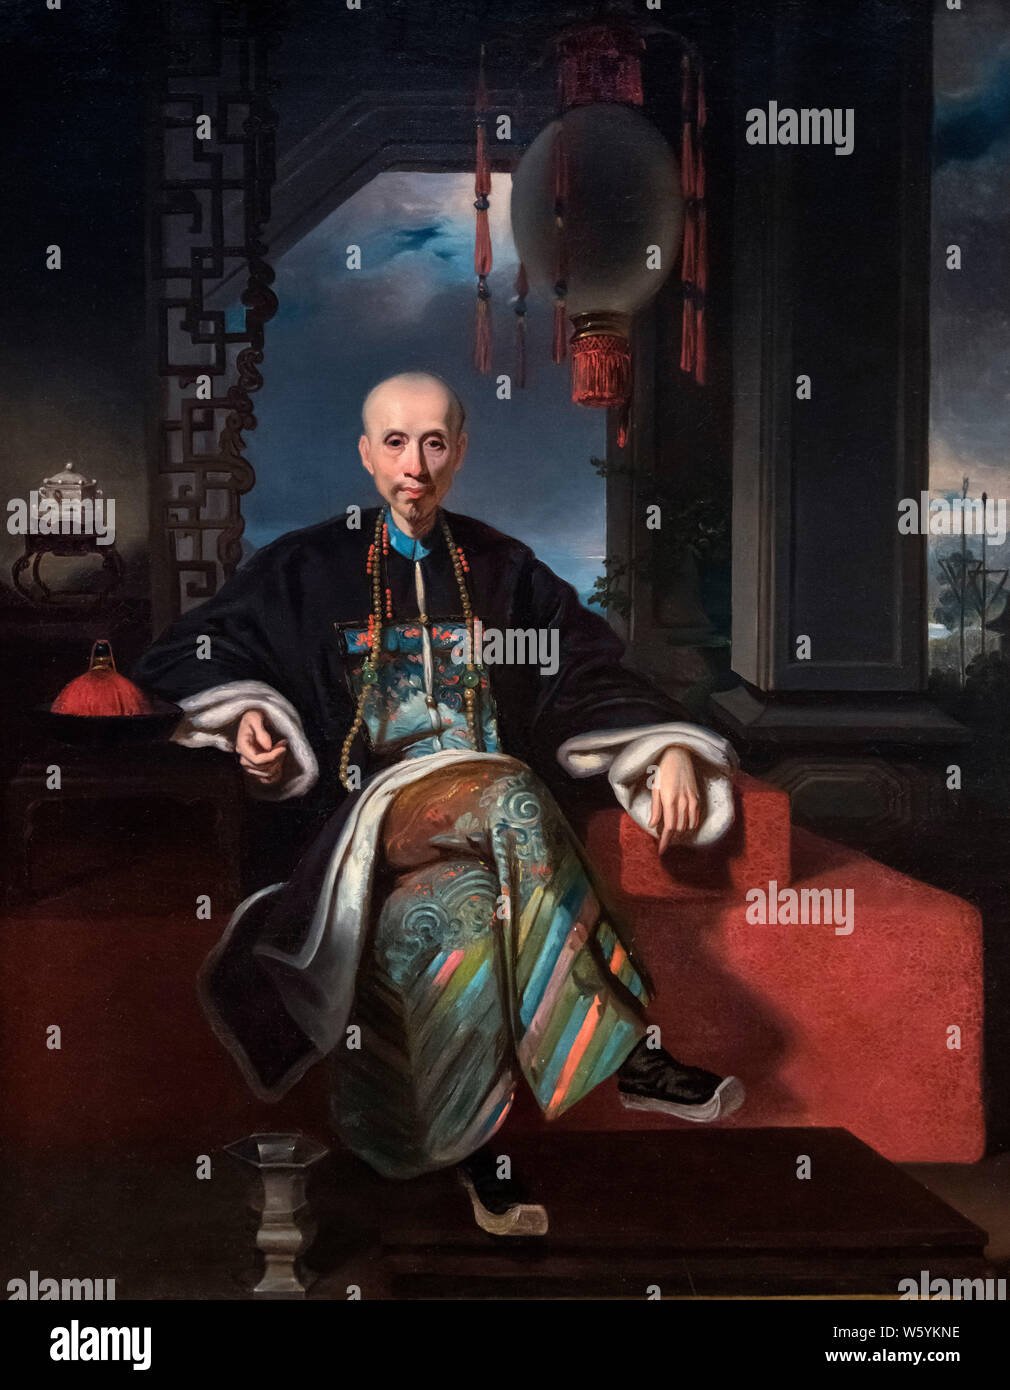 Portrait of Howqua (Wu Bingjian - 1769-1843) by Kwan Kiu Cheong, oil on canvas, early 19th century. Howqua was the most important of the hong merchants in the Thirteen Factories, head of the E-wo hong and leader of the Canton Cohong. He was once the richest man in the world. Stock Photo